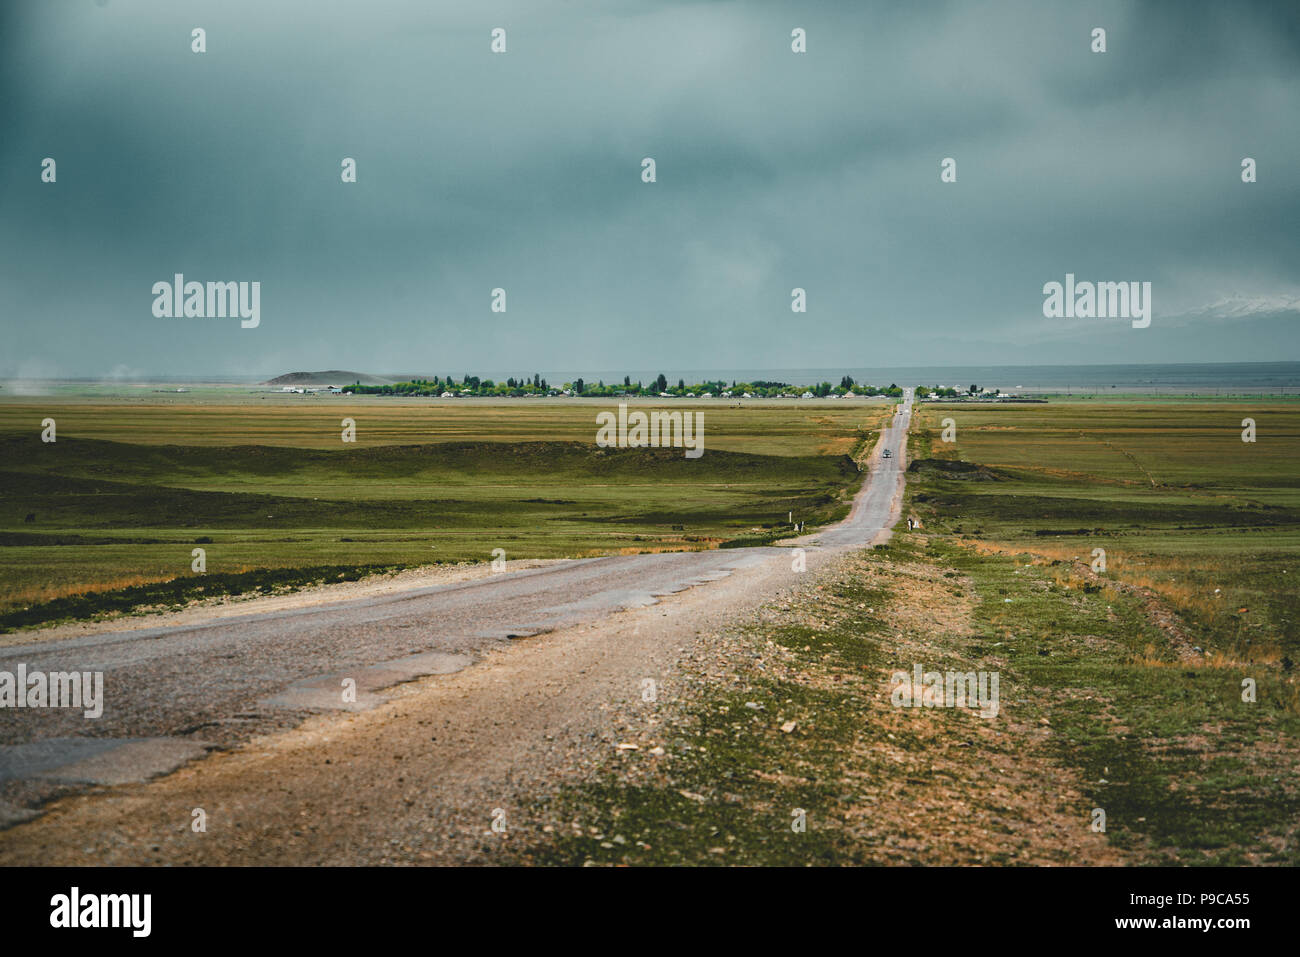 Highway street empty with green Kazakhstan Steppe view Stock Photo